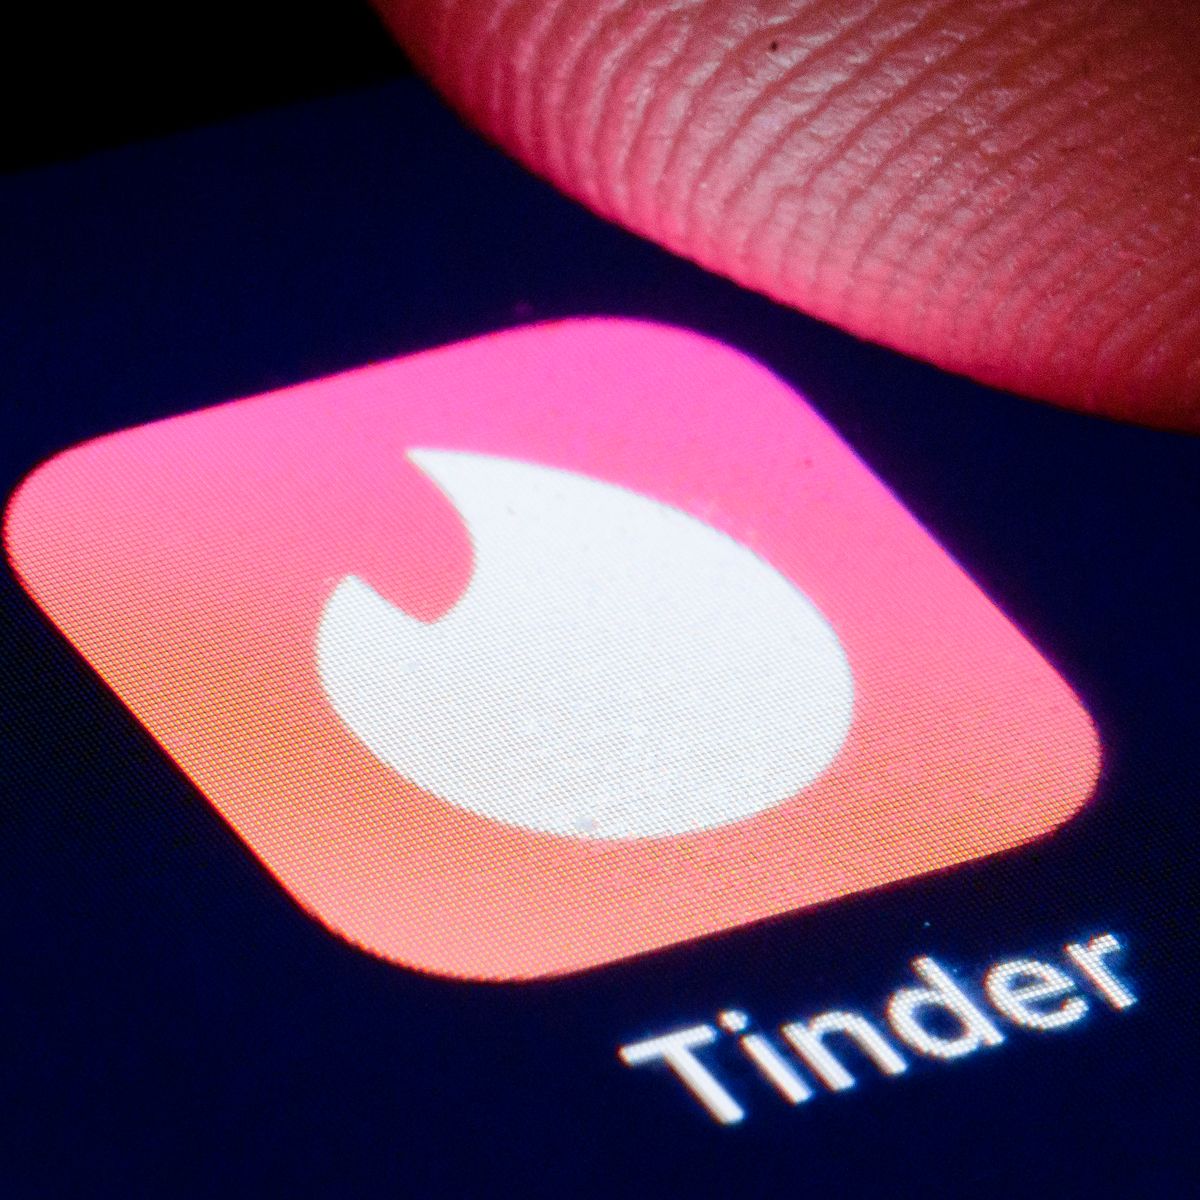 Are You Ready To Video Chat With Your Tinder Matches